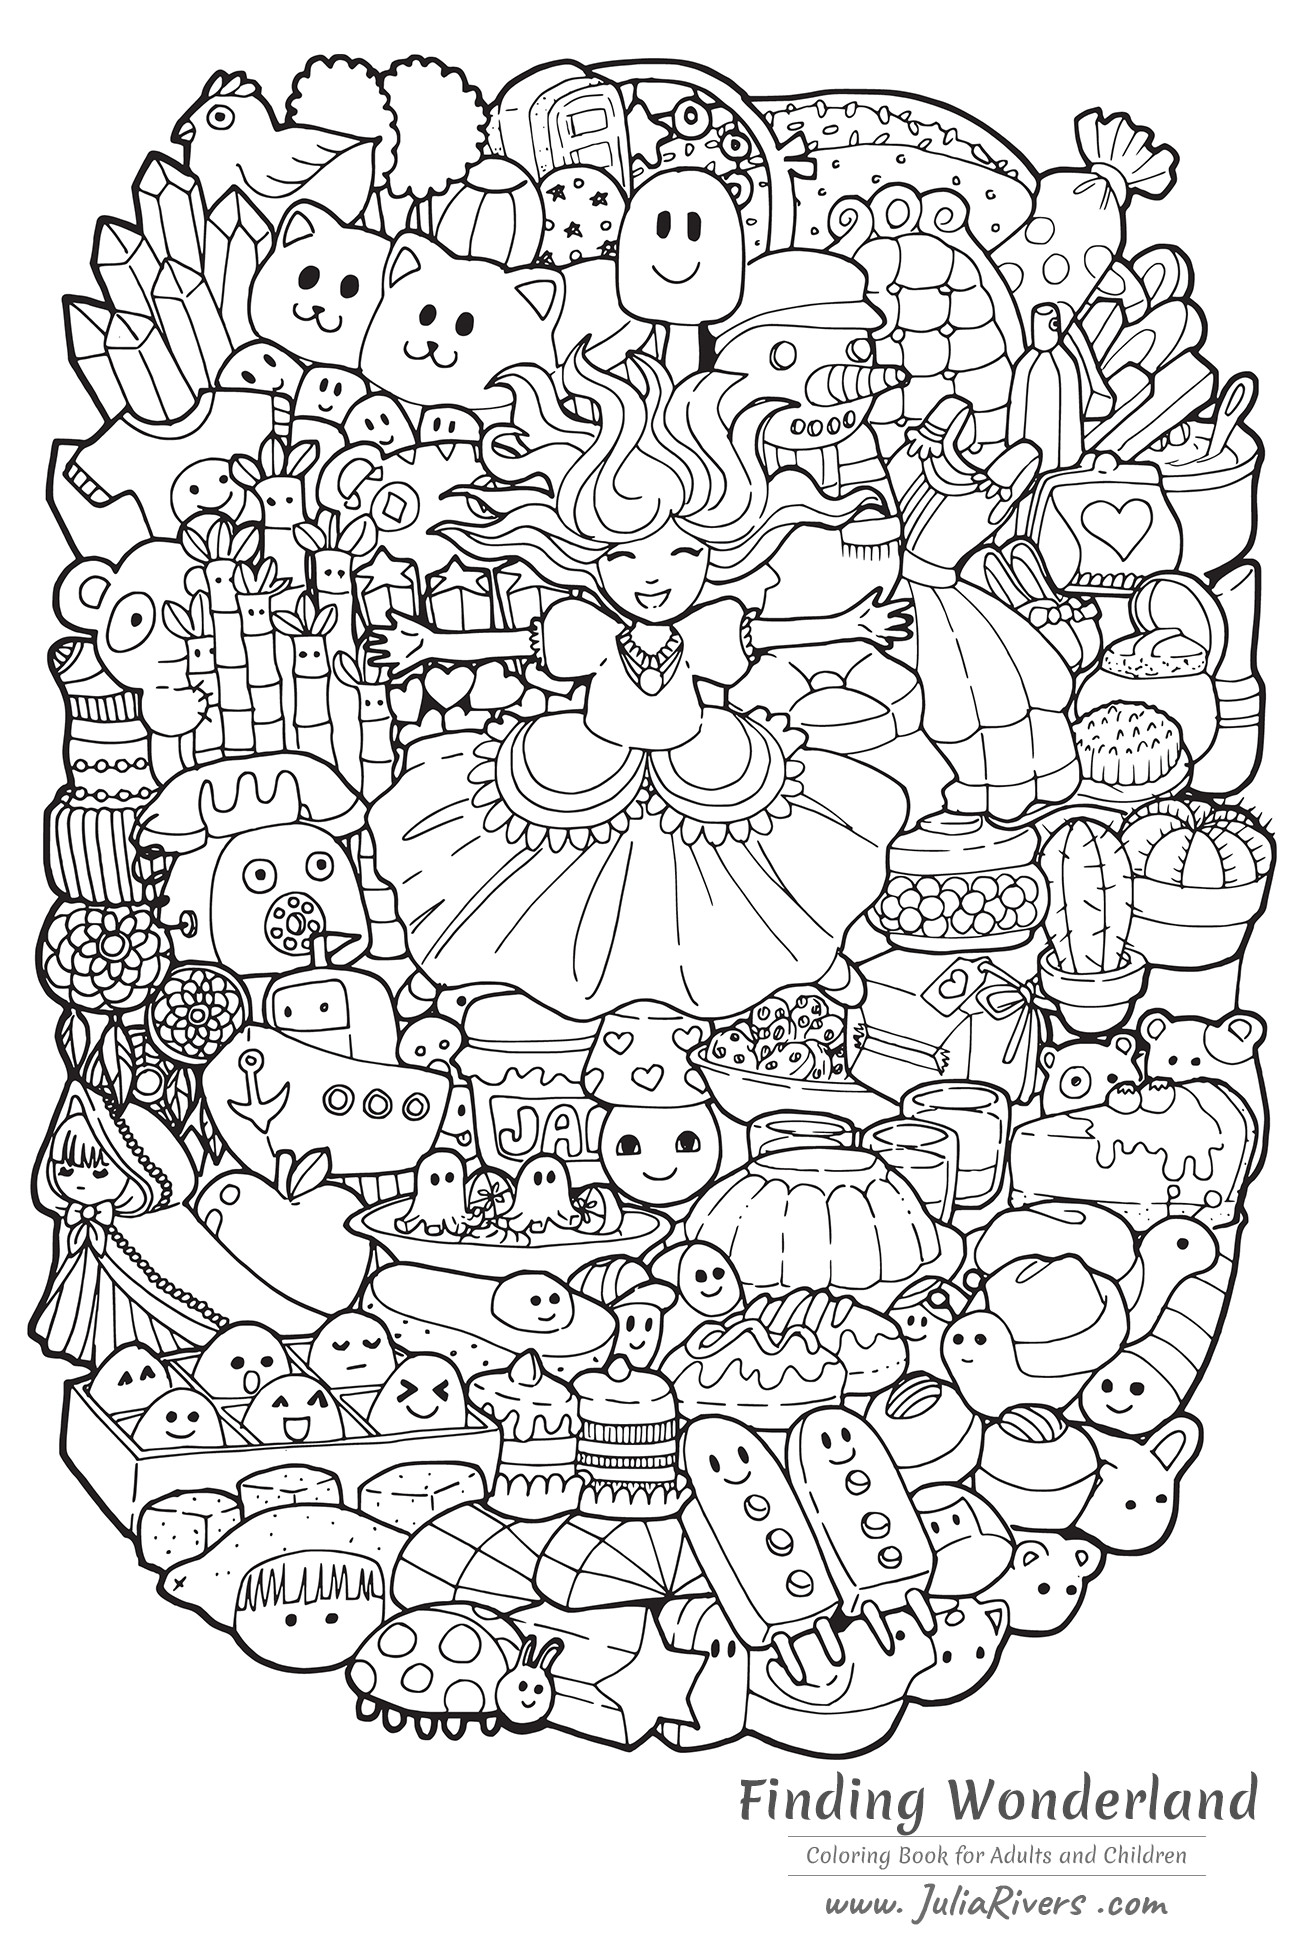 Princess Anime Coloring Pages